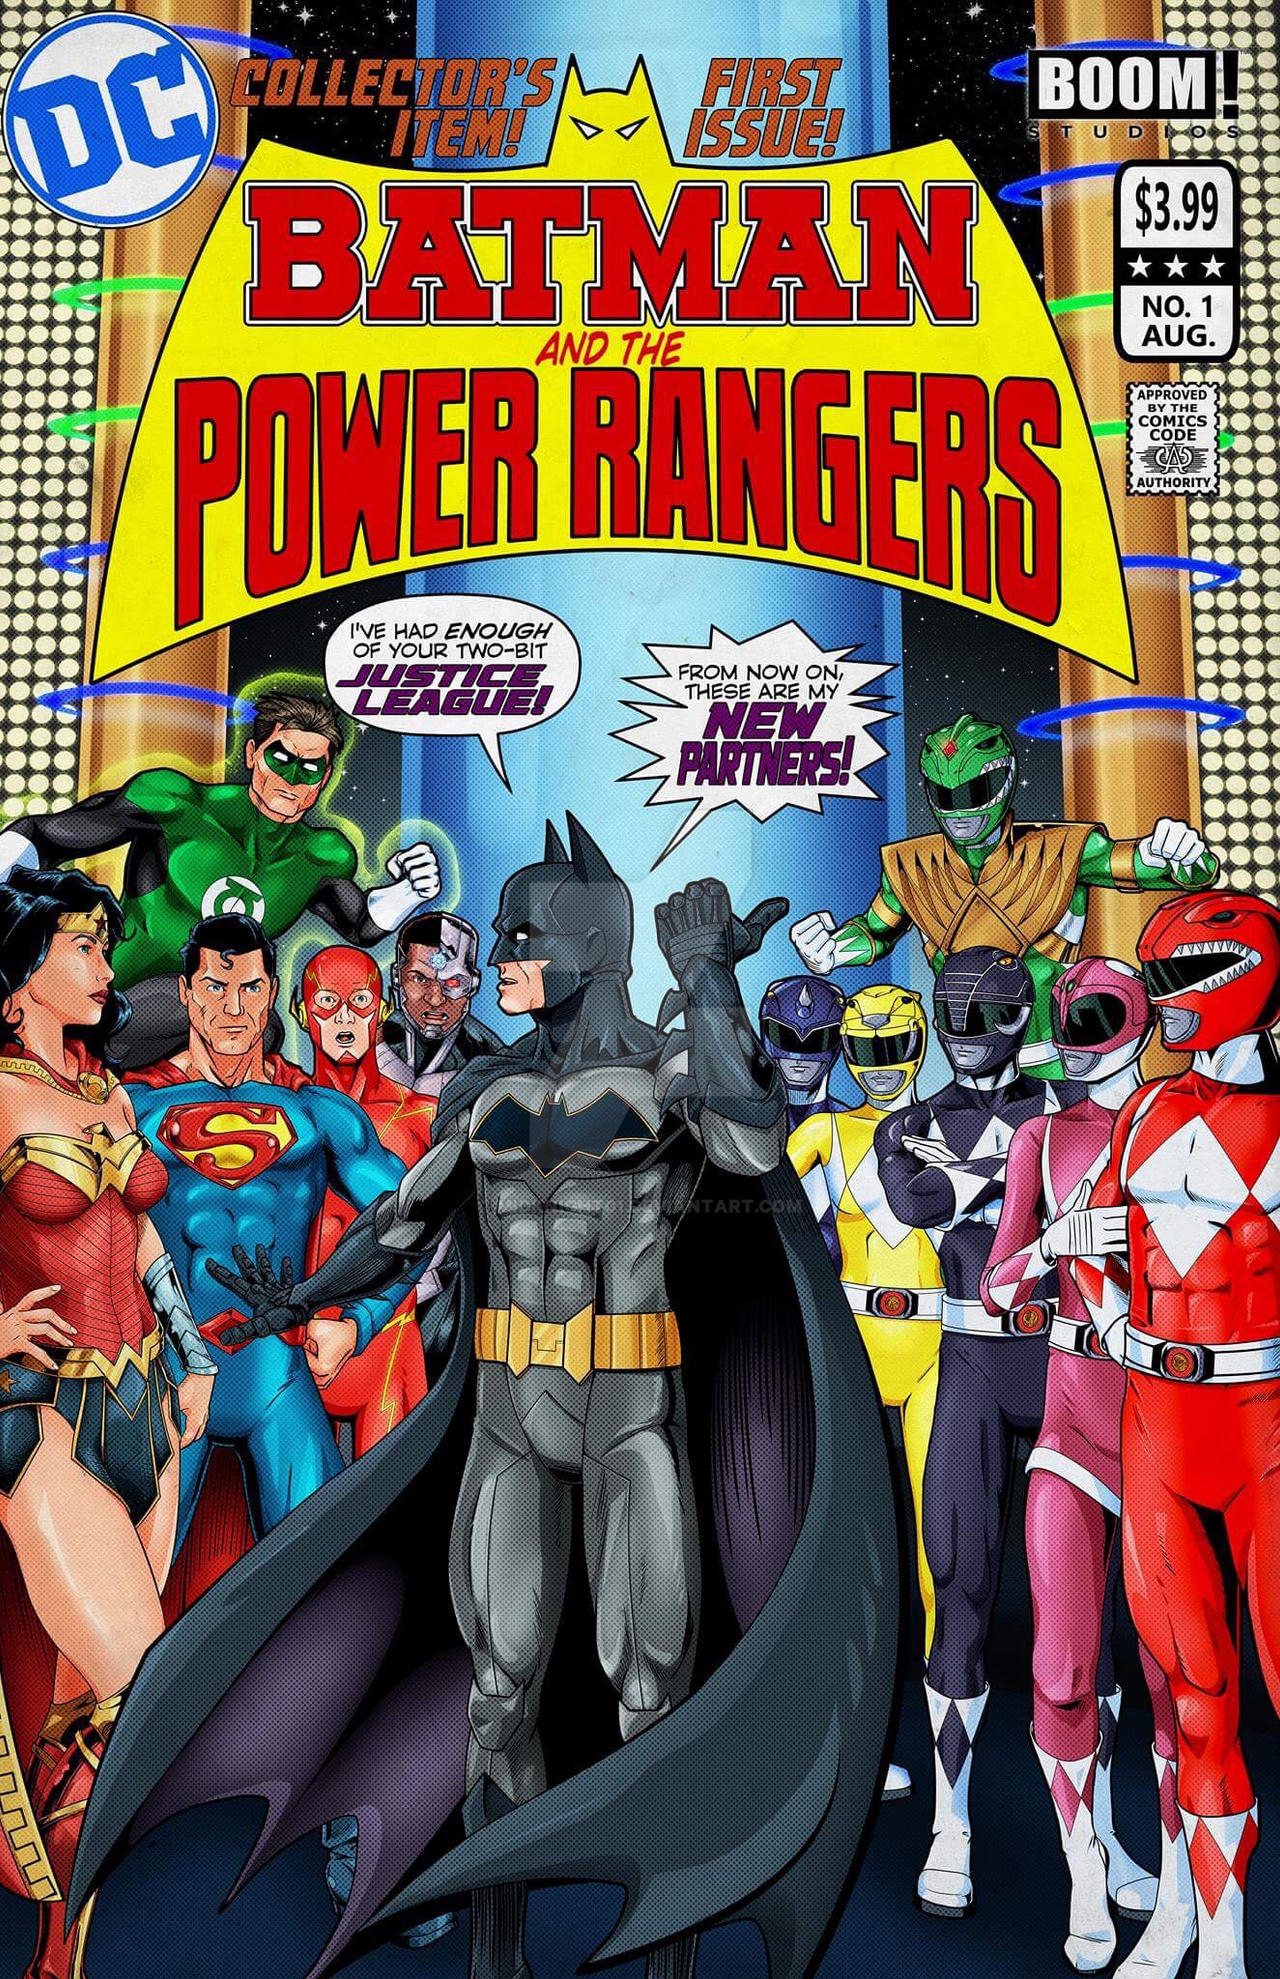 Batman and the power rangers outsiders homage by midknight01 on DeviantArt